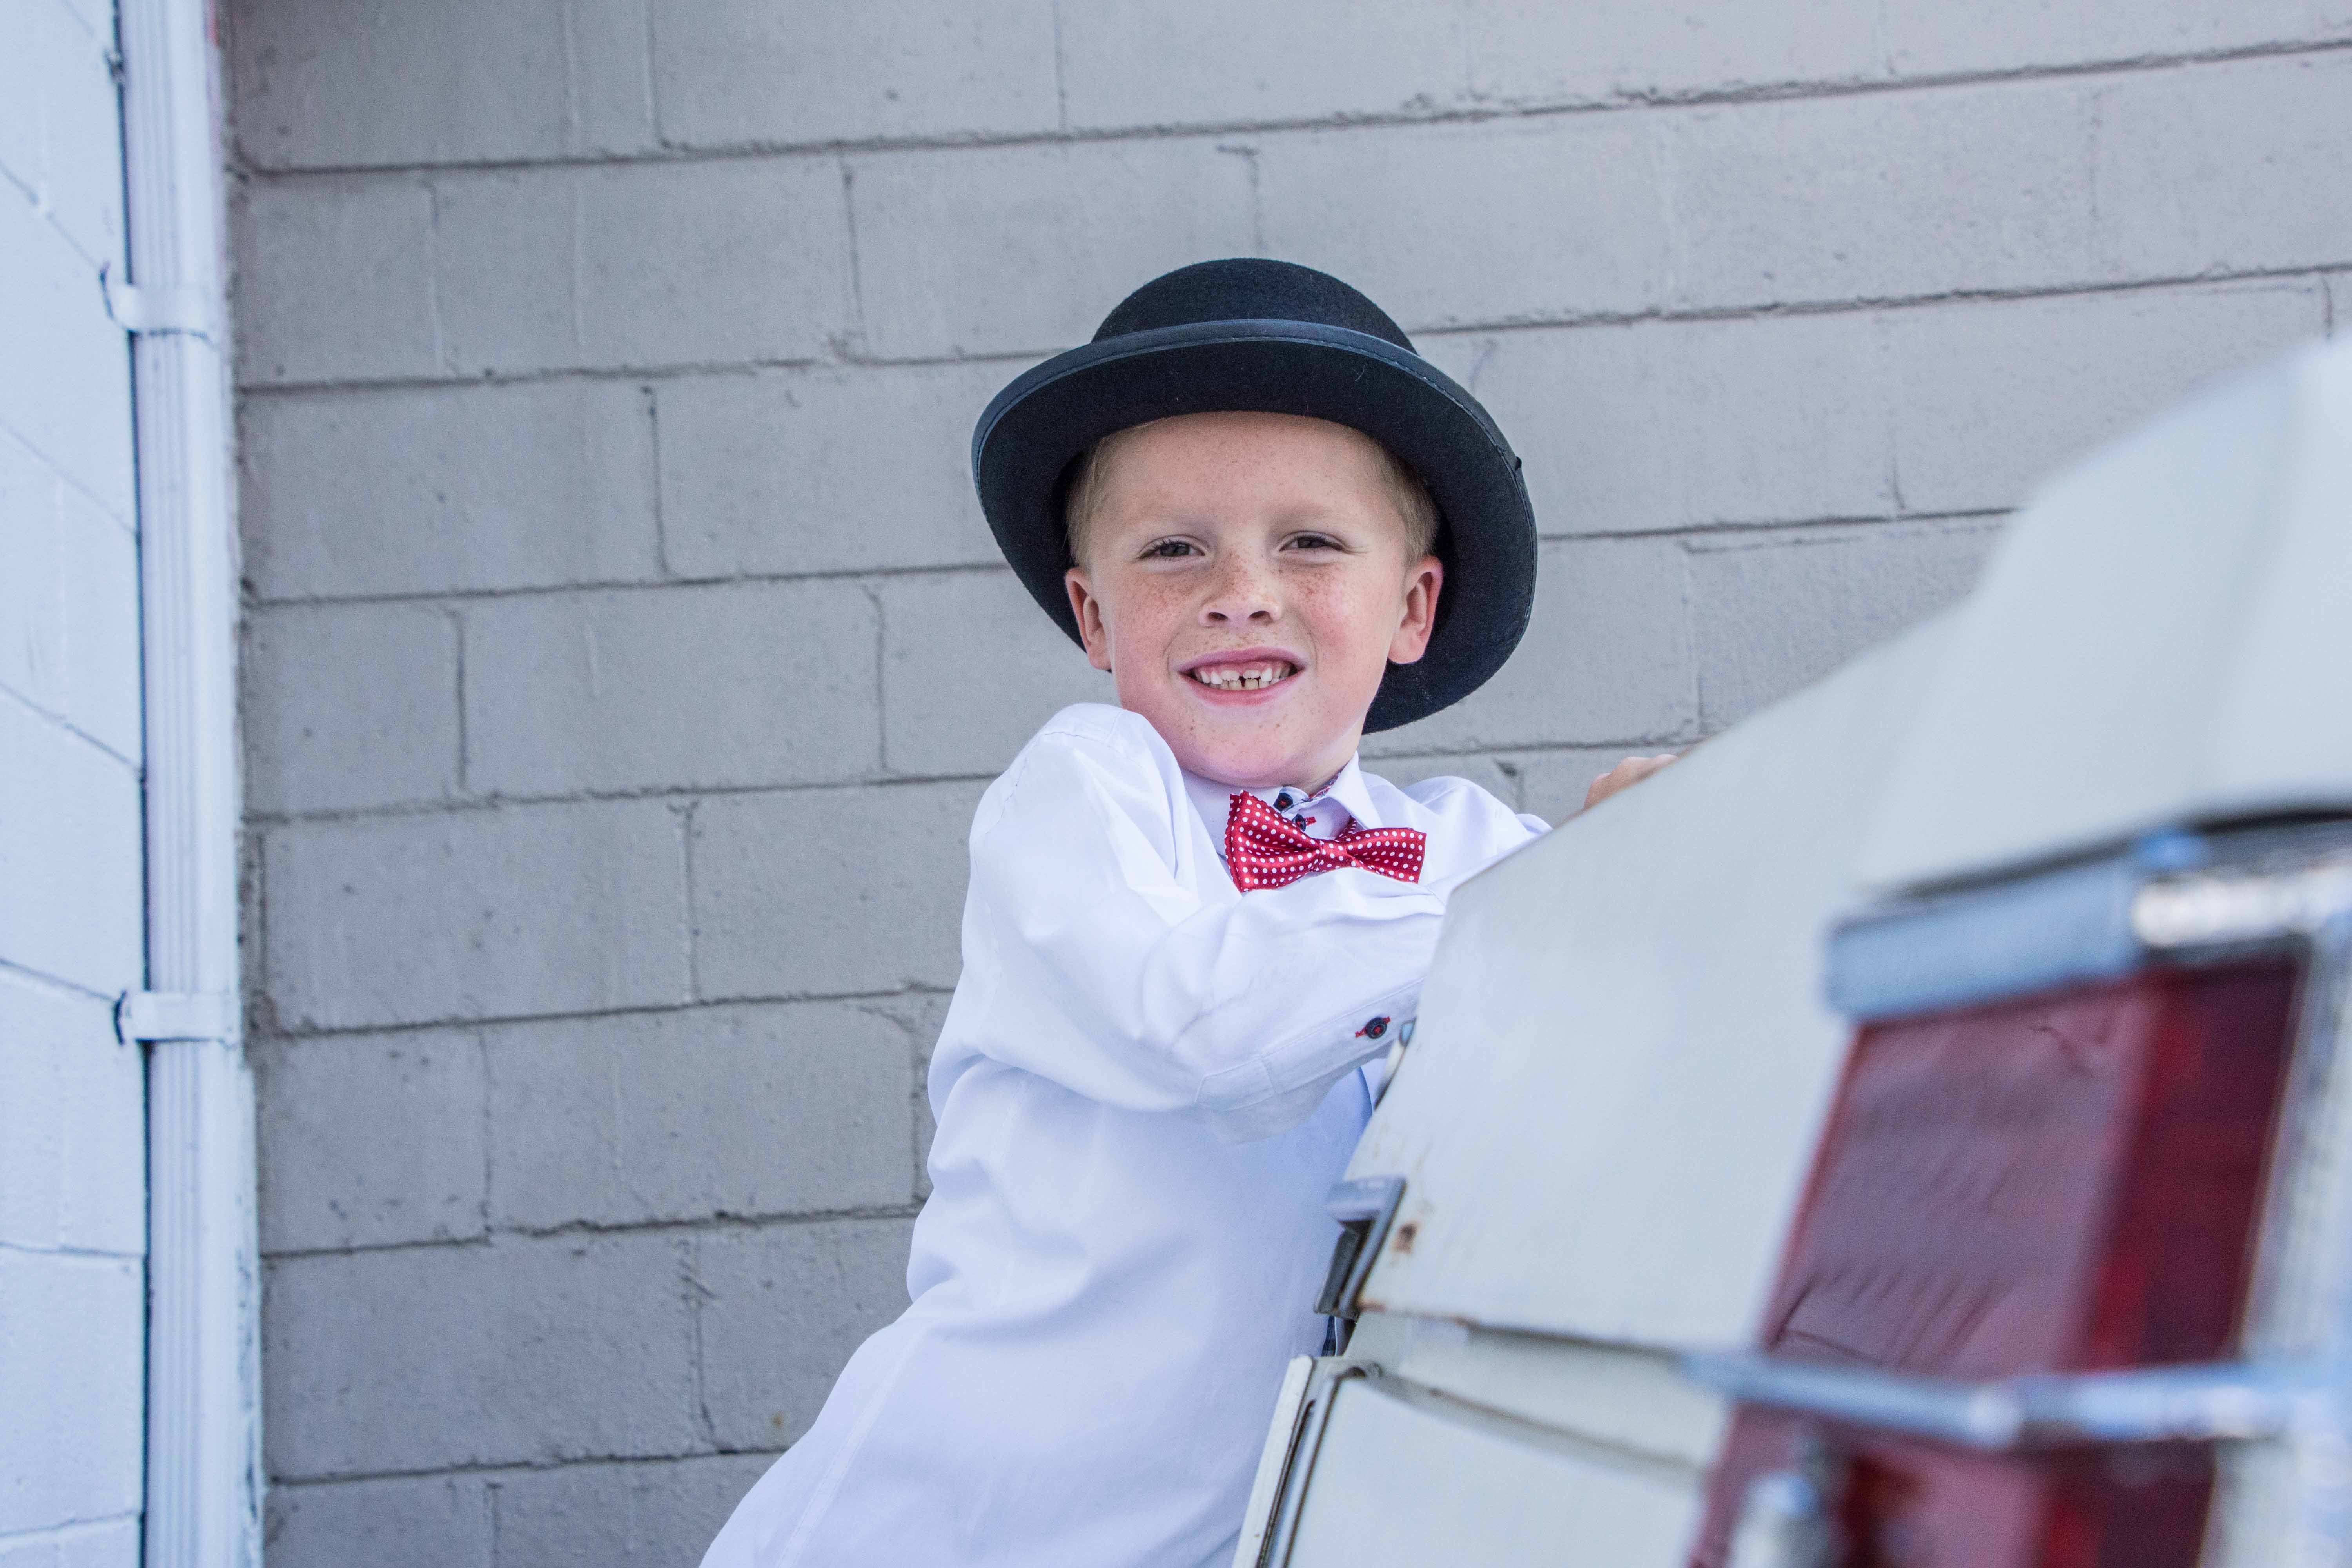 A young boy in white clothes. | Source: Unsplash